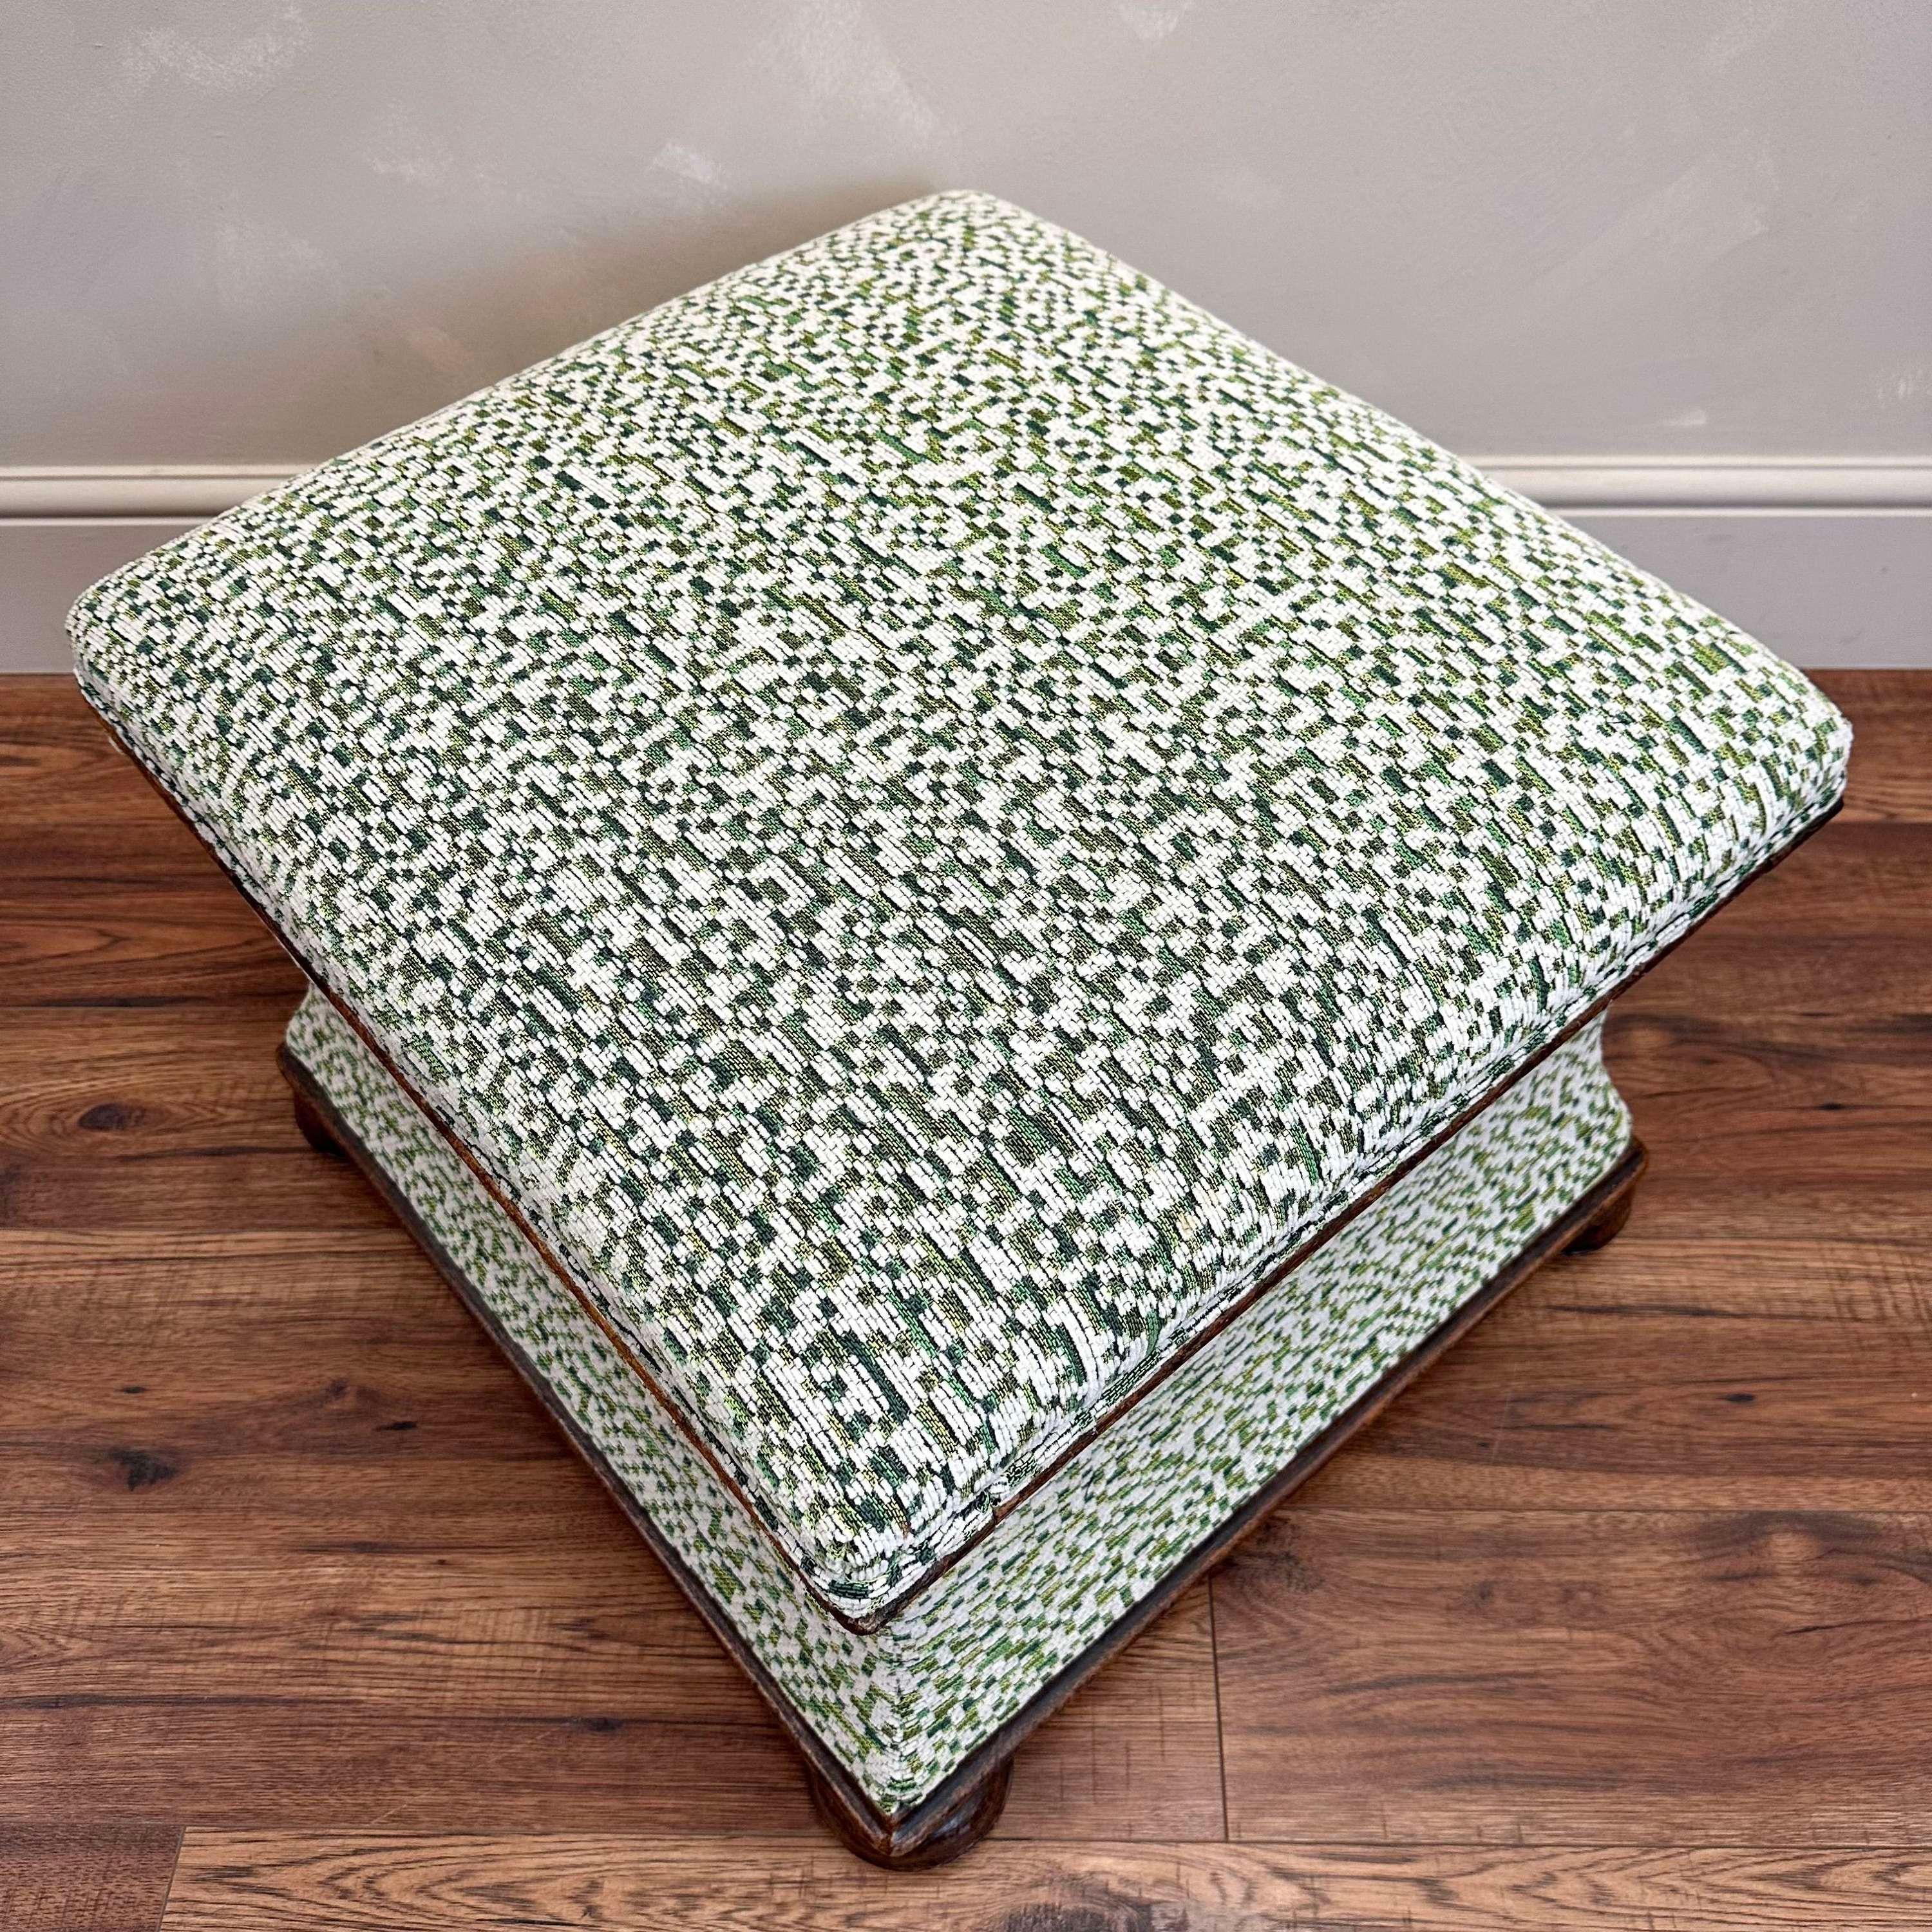 19th Century English upholstered Ottoman Footstool For Sale 2